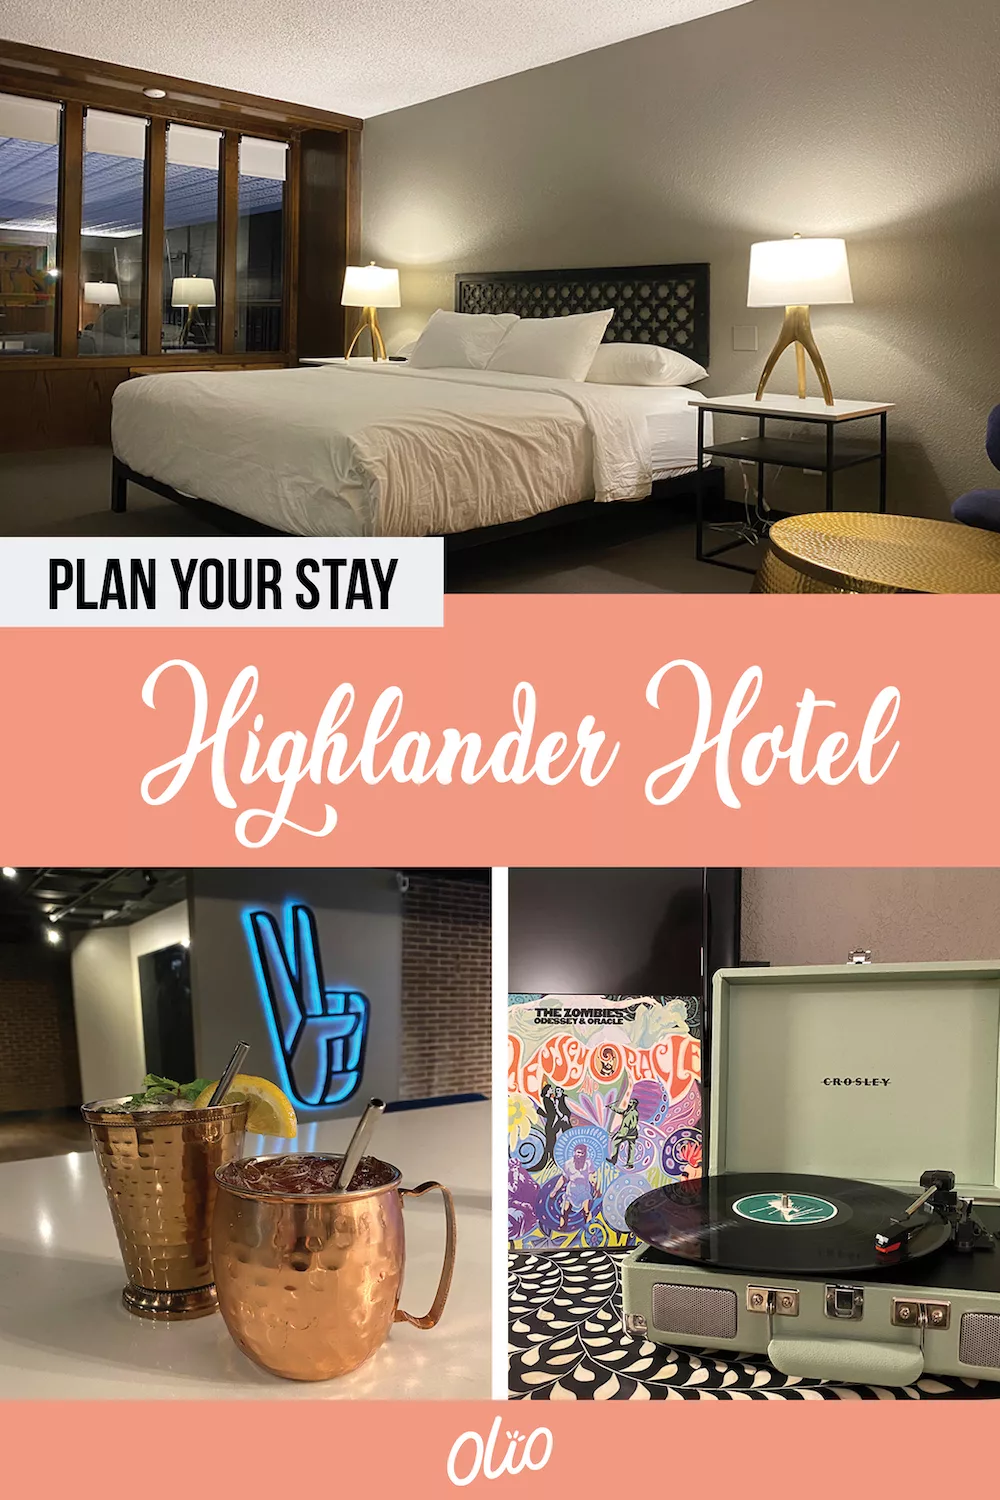 Whether you're planning a staycation or just passing through, The Highlander Hotel in Iowa City is the perfect place to stay! This former Iowa supper club is fully restored with a groovy '70s vibe complete with spacious bar, incredible indoor pool, in-room record players and more. #Iowa #IowaCity #boutiquehotel